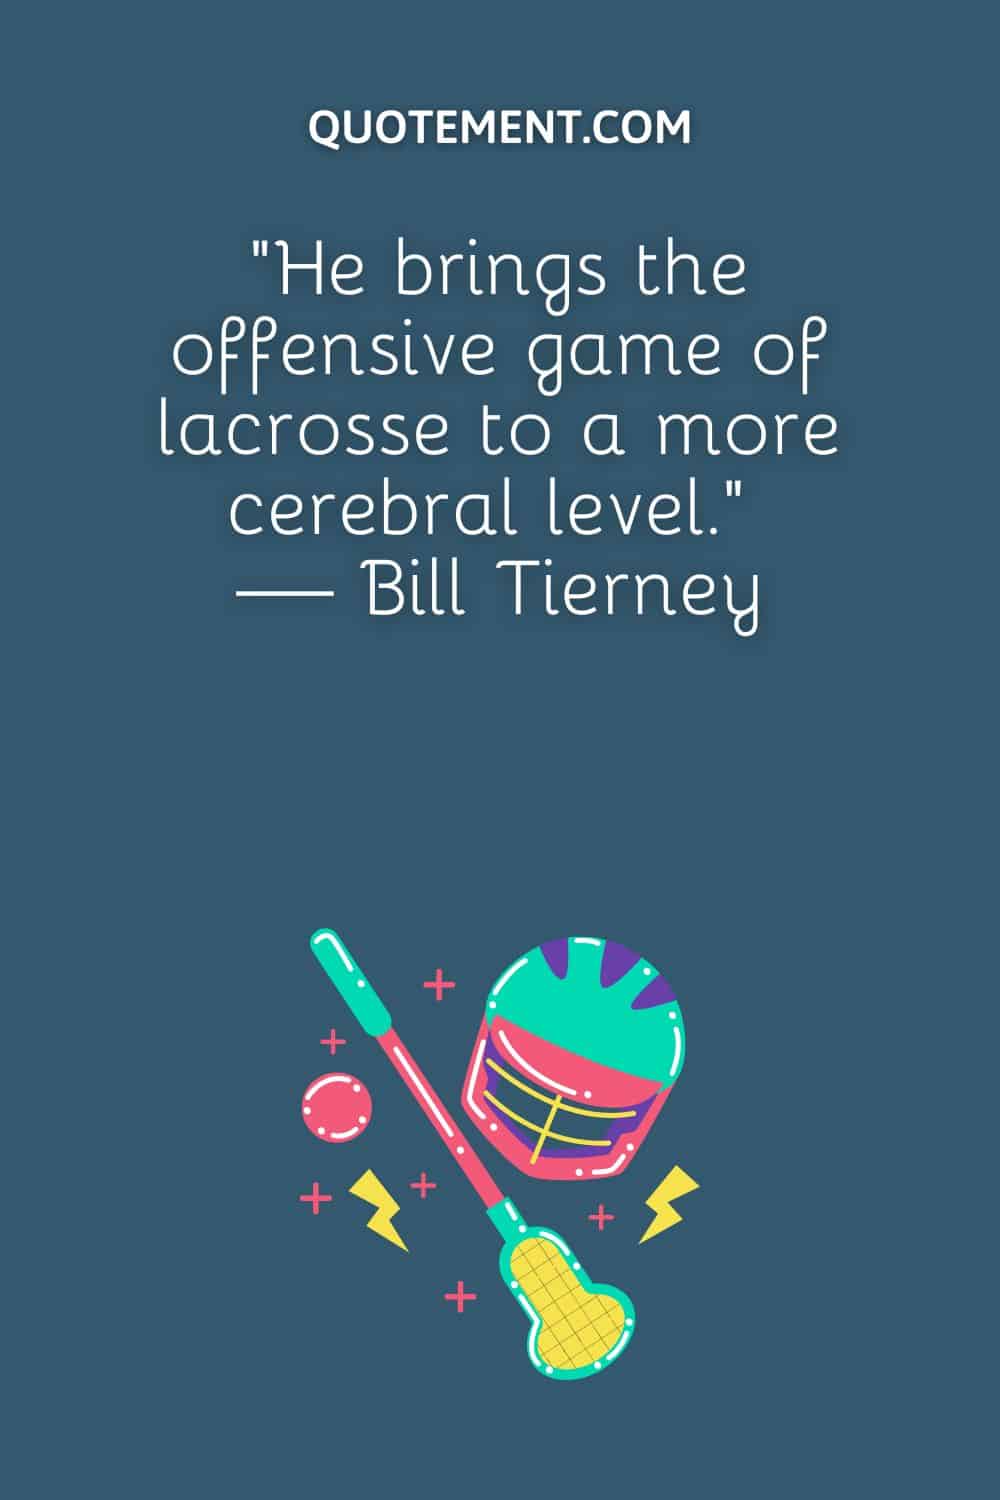 “He brings the offensive game of lacrosse to a more cerebral level.” — Bill Tierney